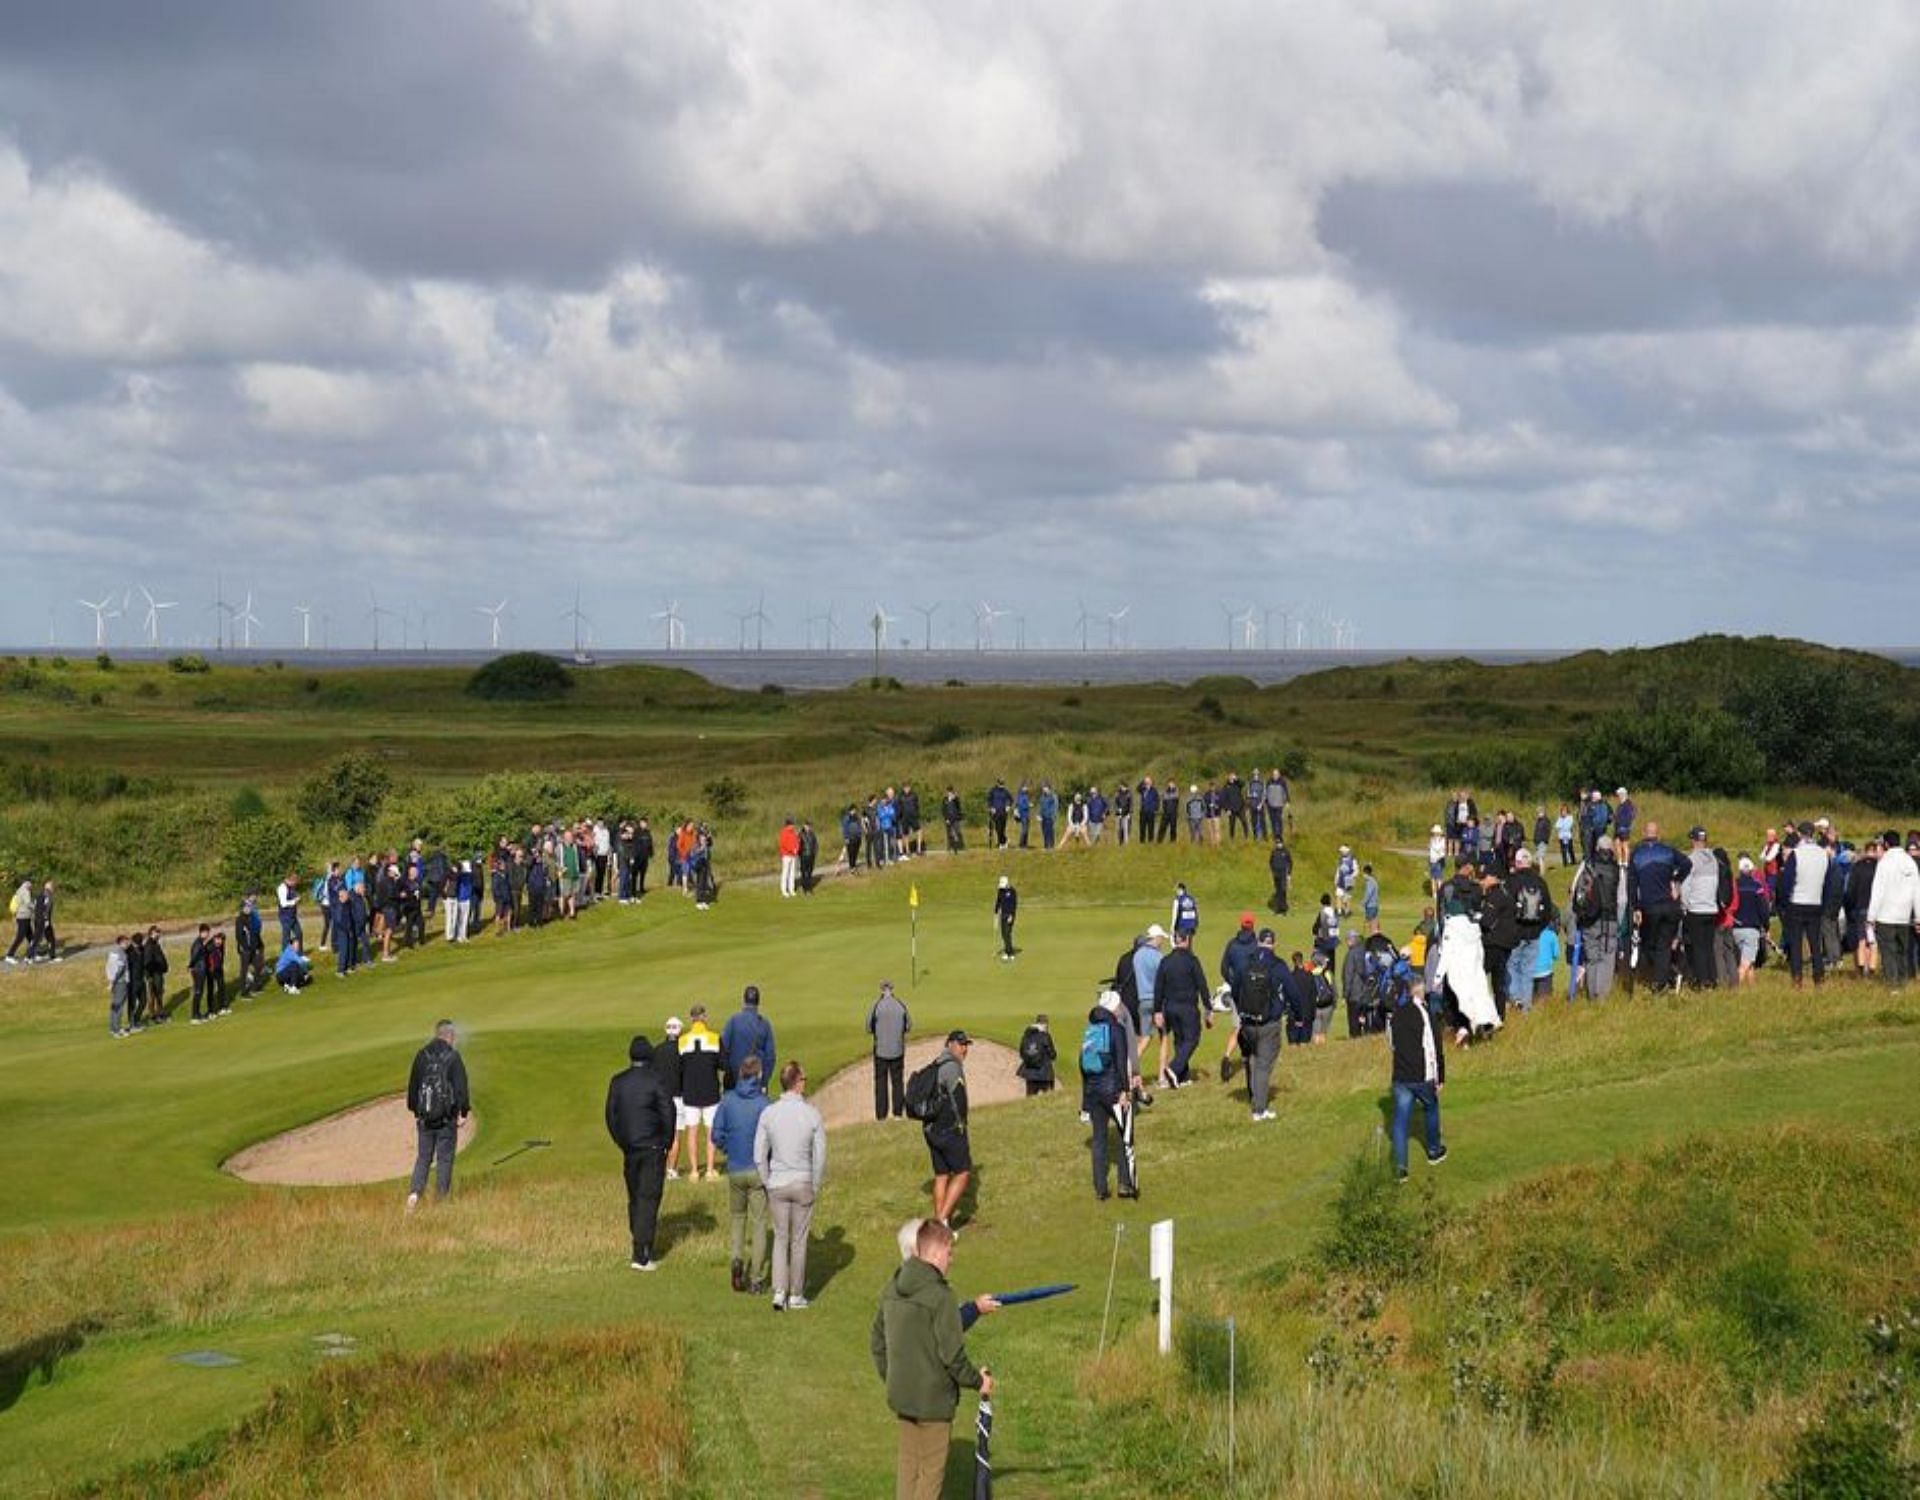 Crowd reunited at the West Lancashire Golf Club to watch Sergio Garcia&#039;s performance (Image via The Irish Independent).